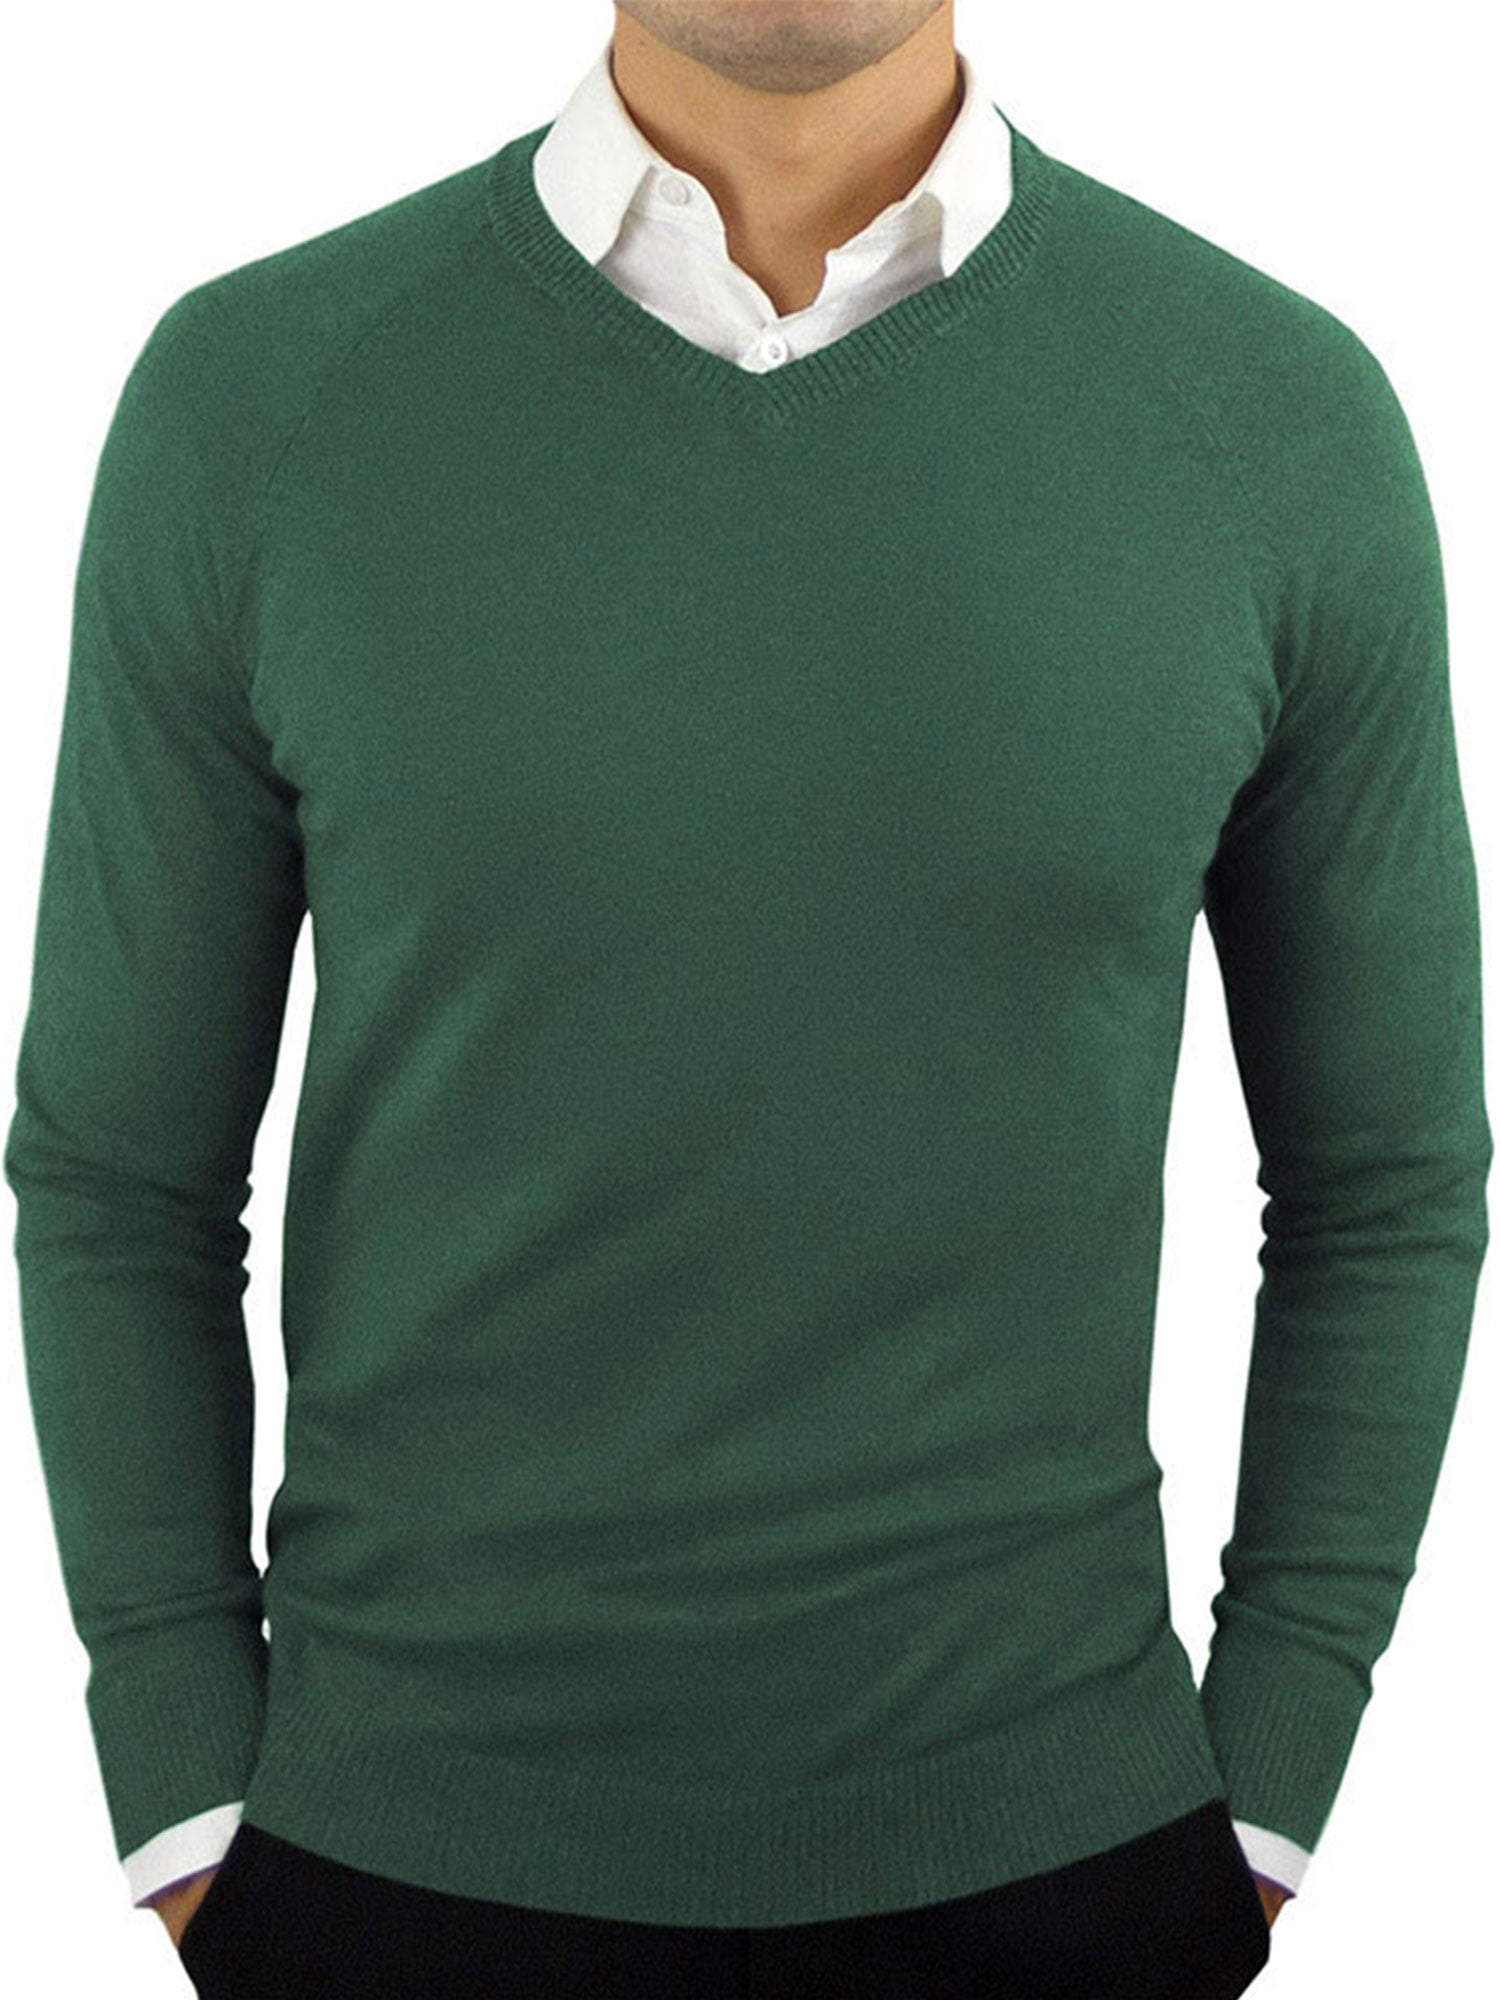 Generic Mens Casual V Neck Solid Pullover Jumper Sweater Tops